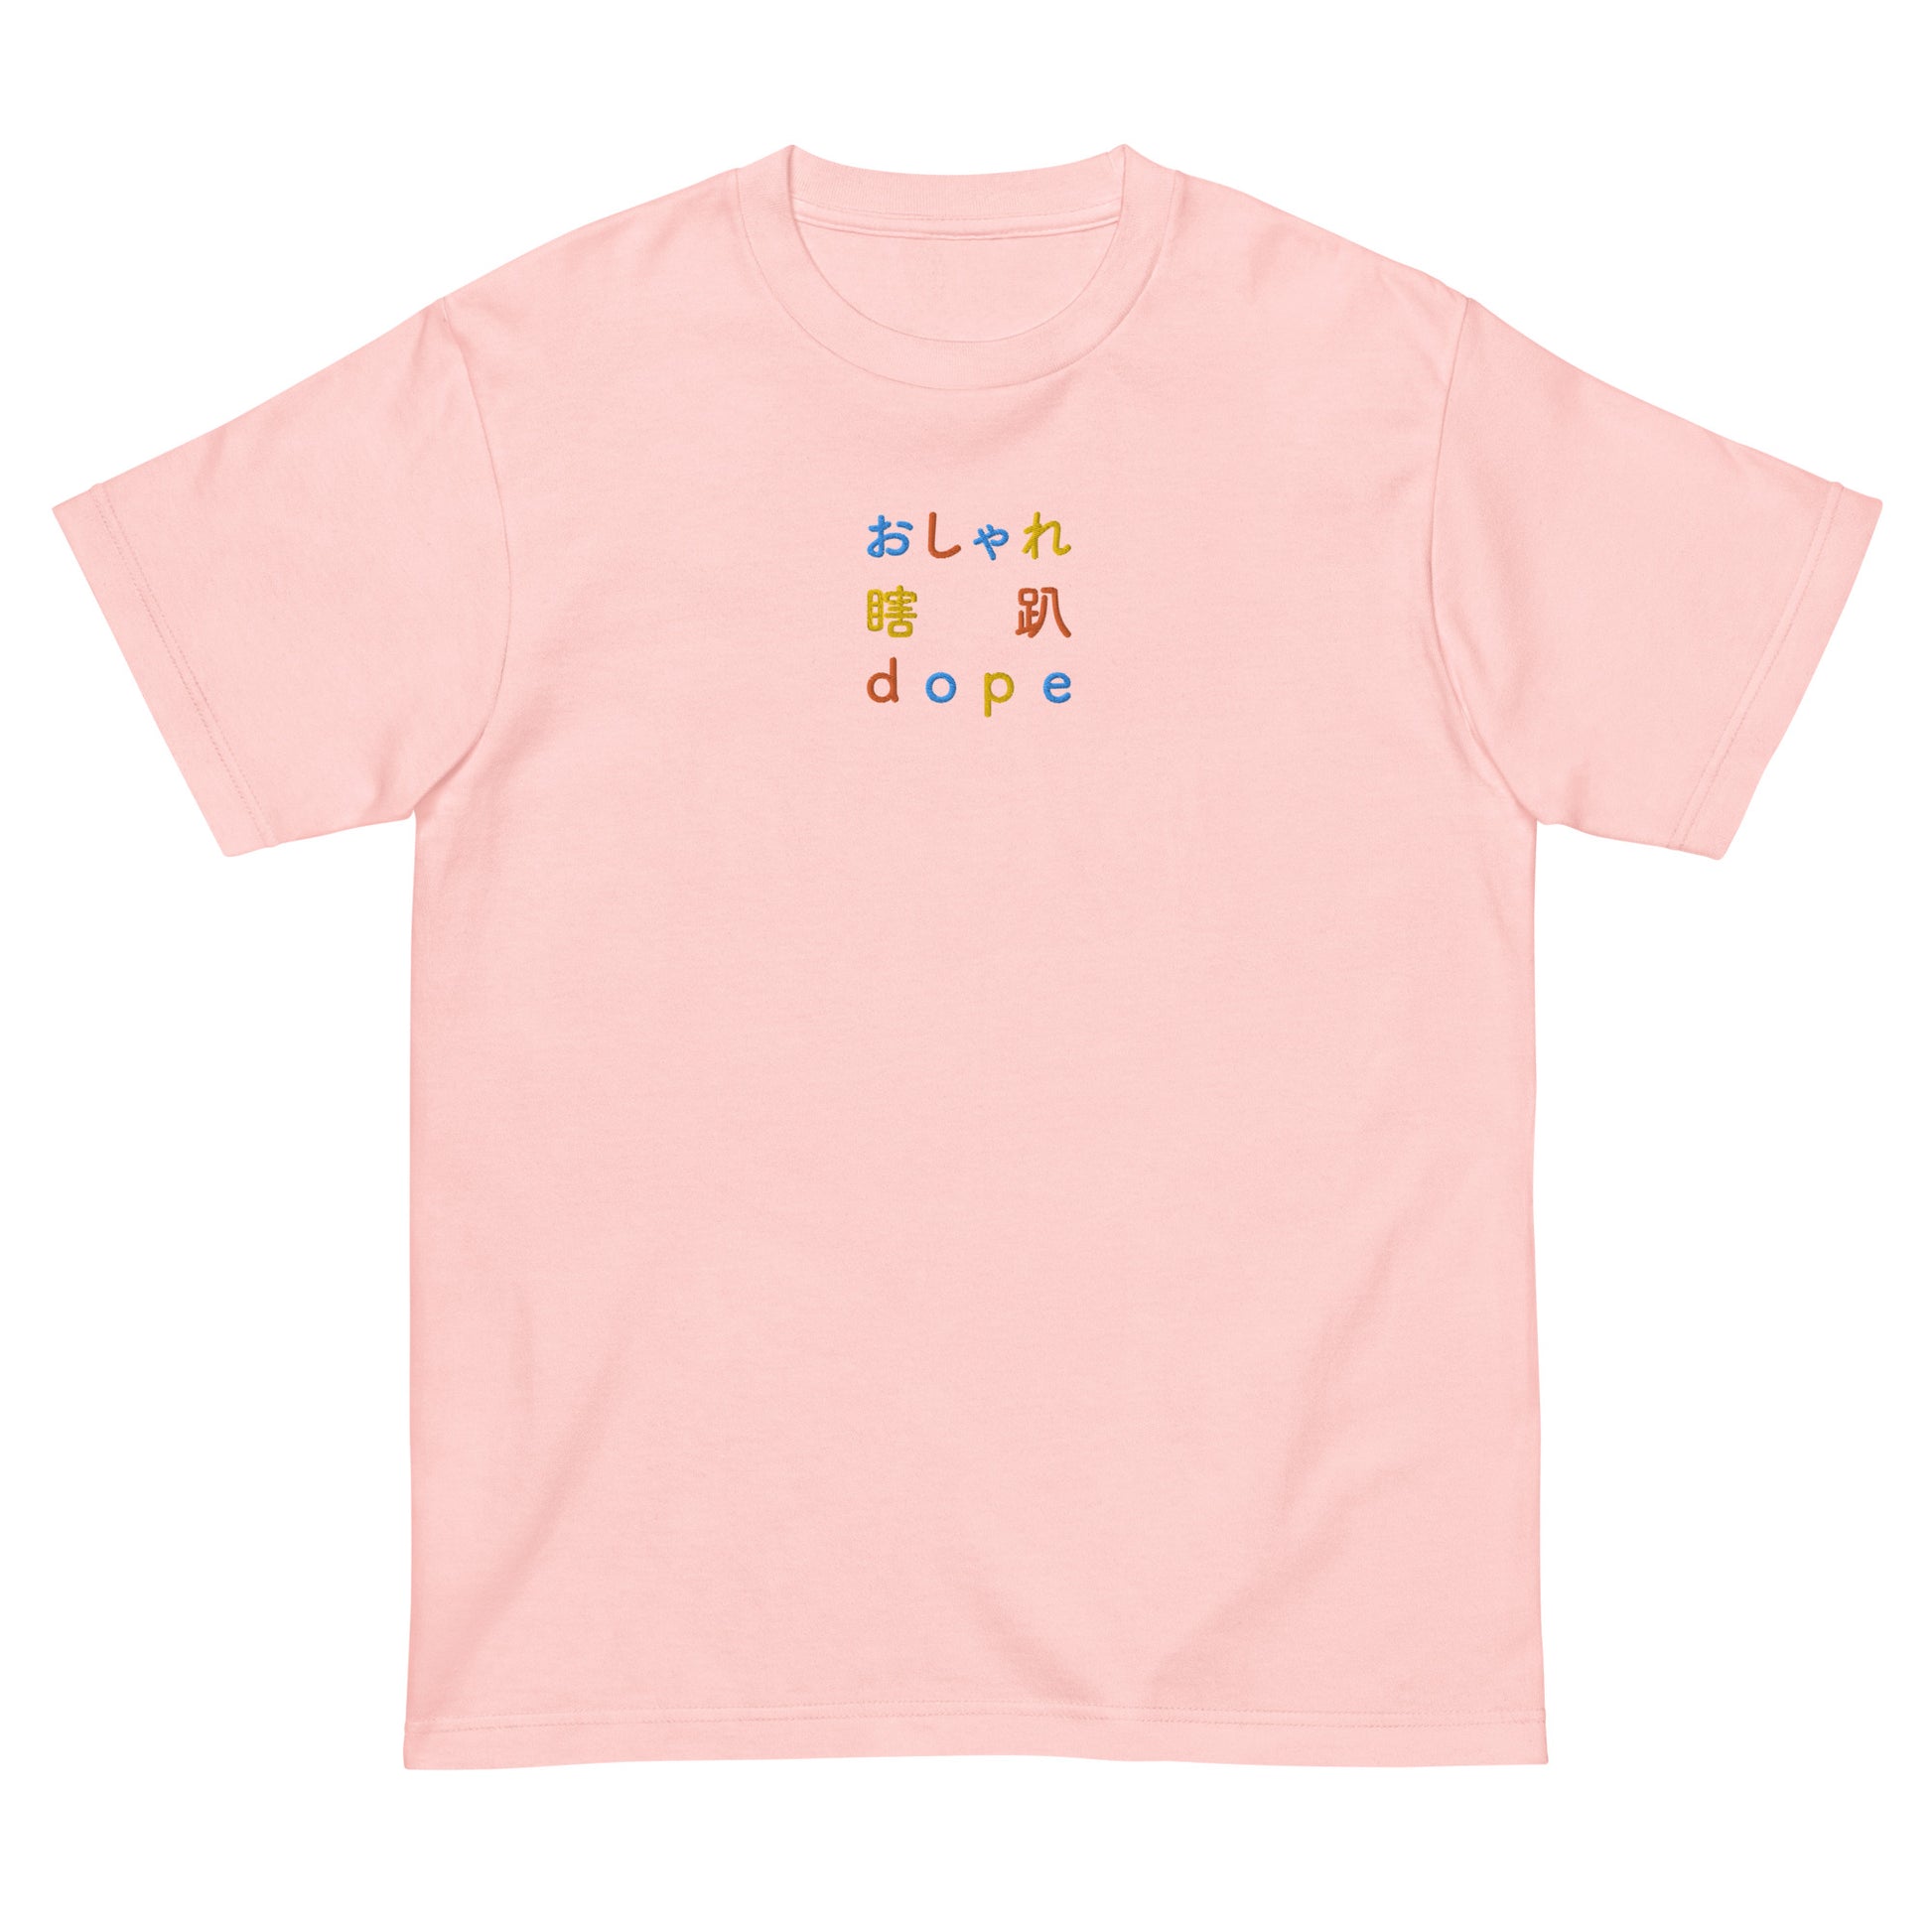 Pink High Quality Tee - Front Design with an Blue, Orange, Yellow Embroidery "Dope" in Japanese,Chinese and English